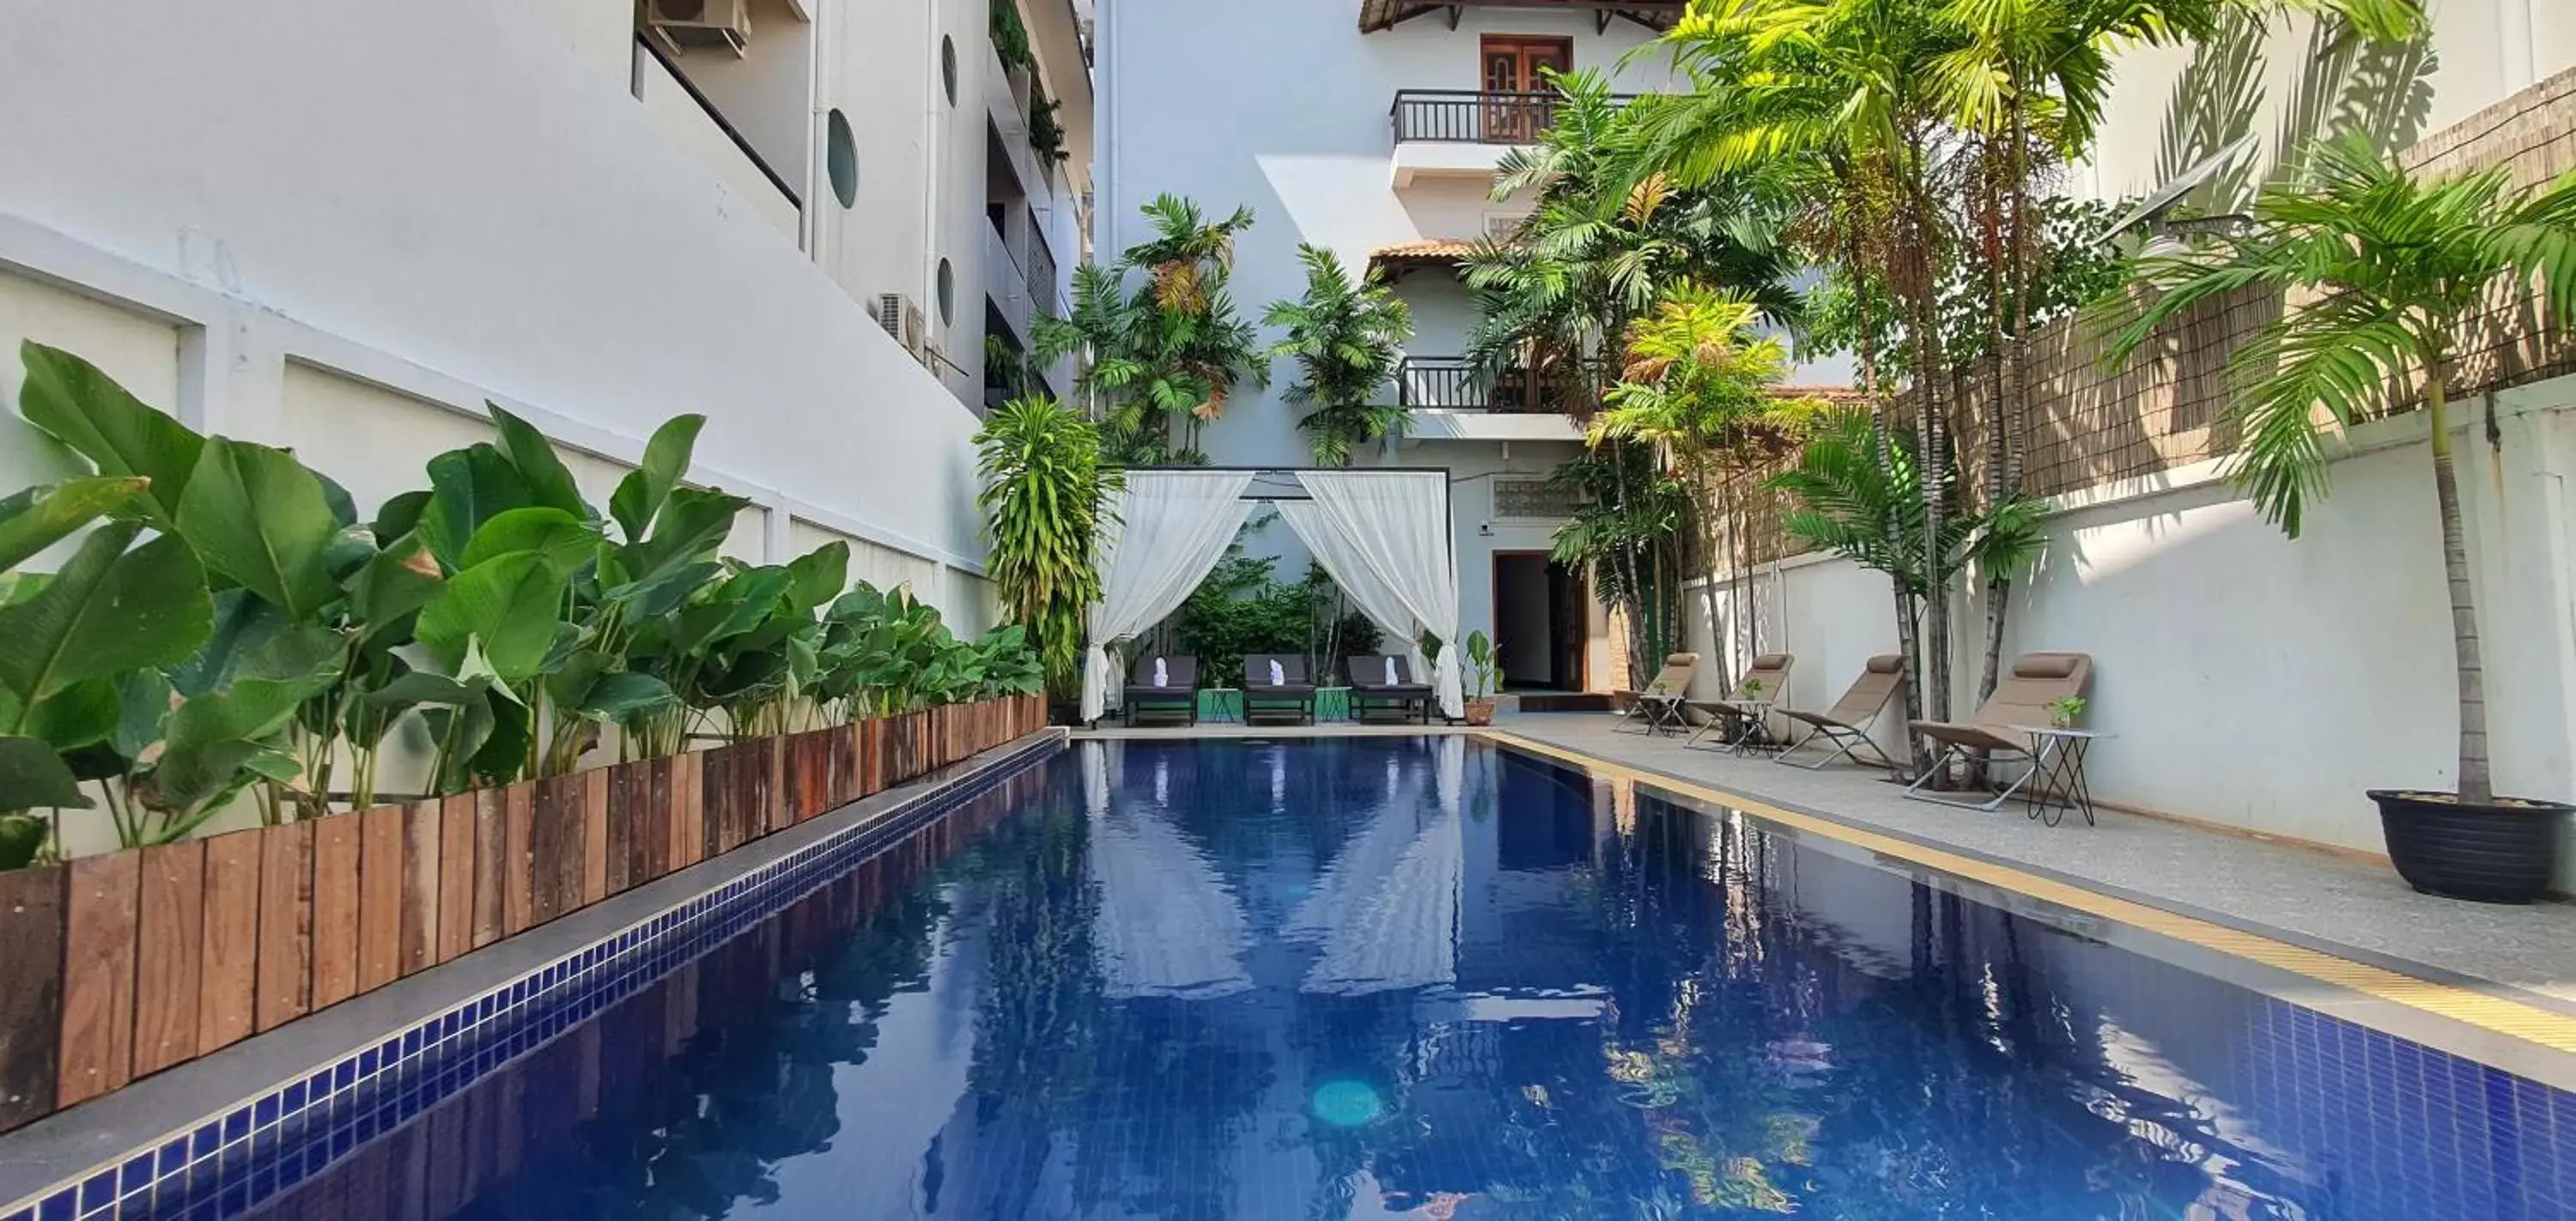 Swimming Pool in Siem Reap Urban Boutique Hotel